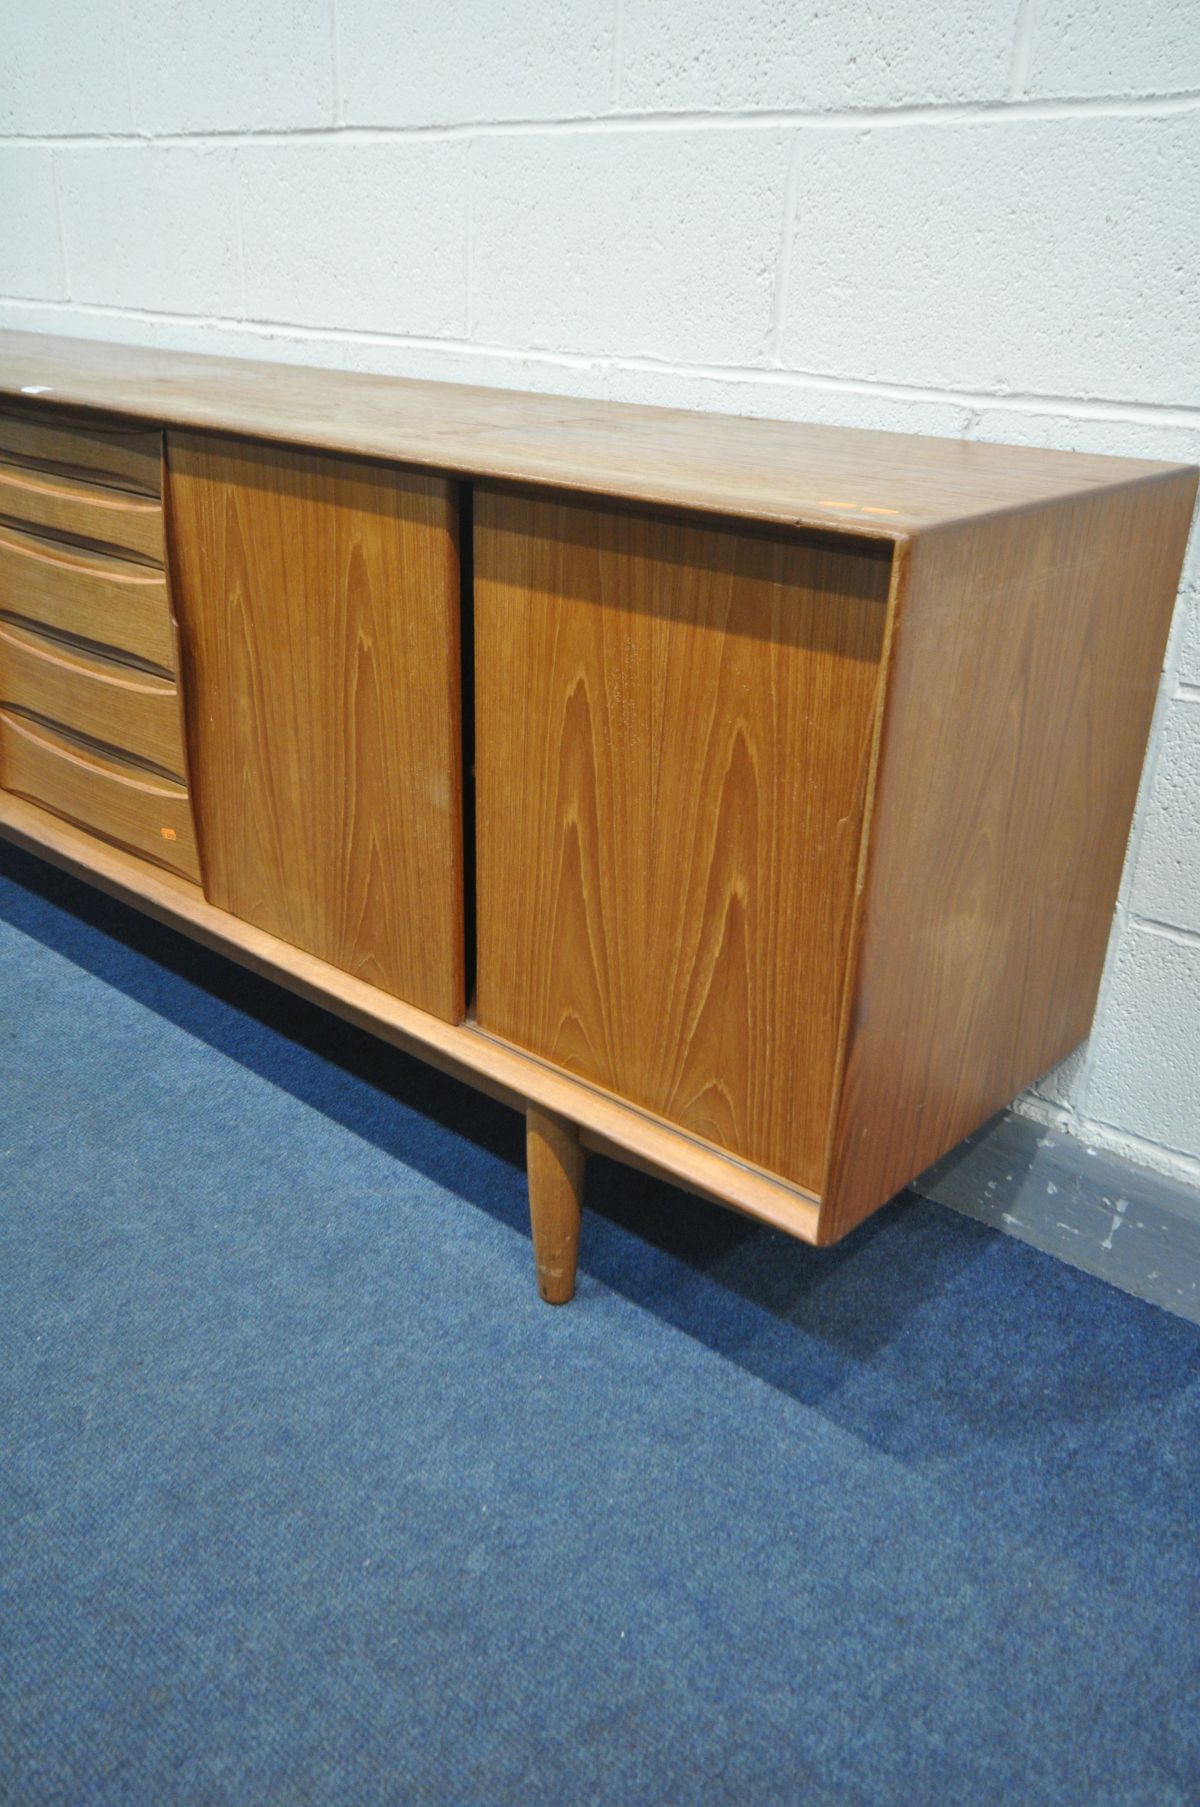 A MID CENTURY DANISH TEAK SIDEBOARD, possibly 'Dyrlund' that's inspired by Arne Vodder's Triennale - Image 2 of 8